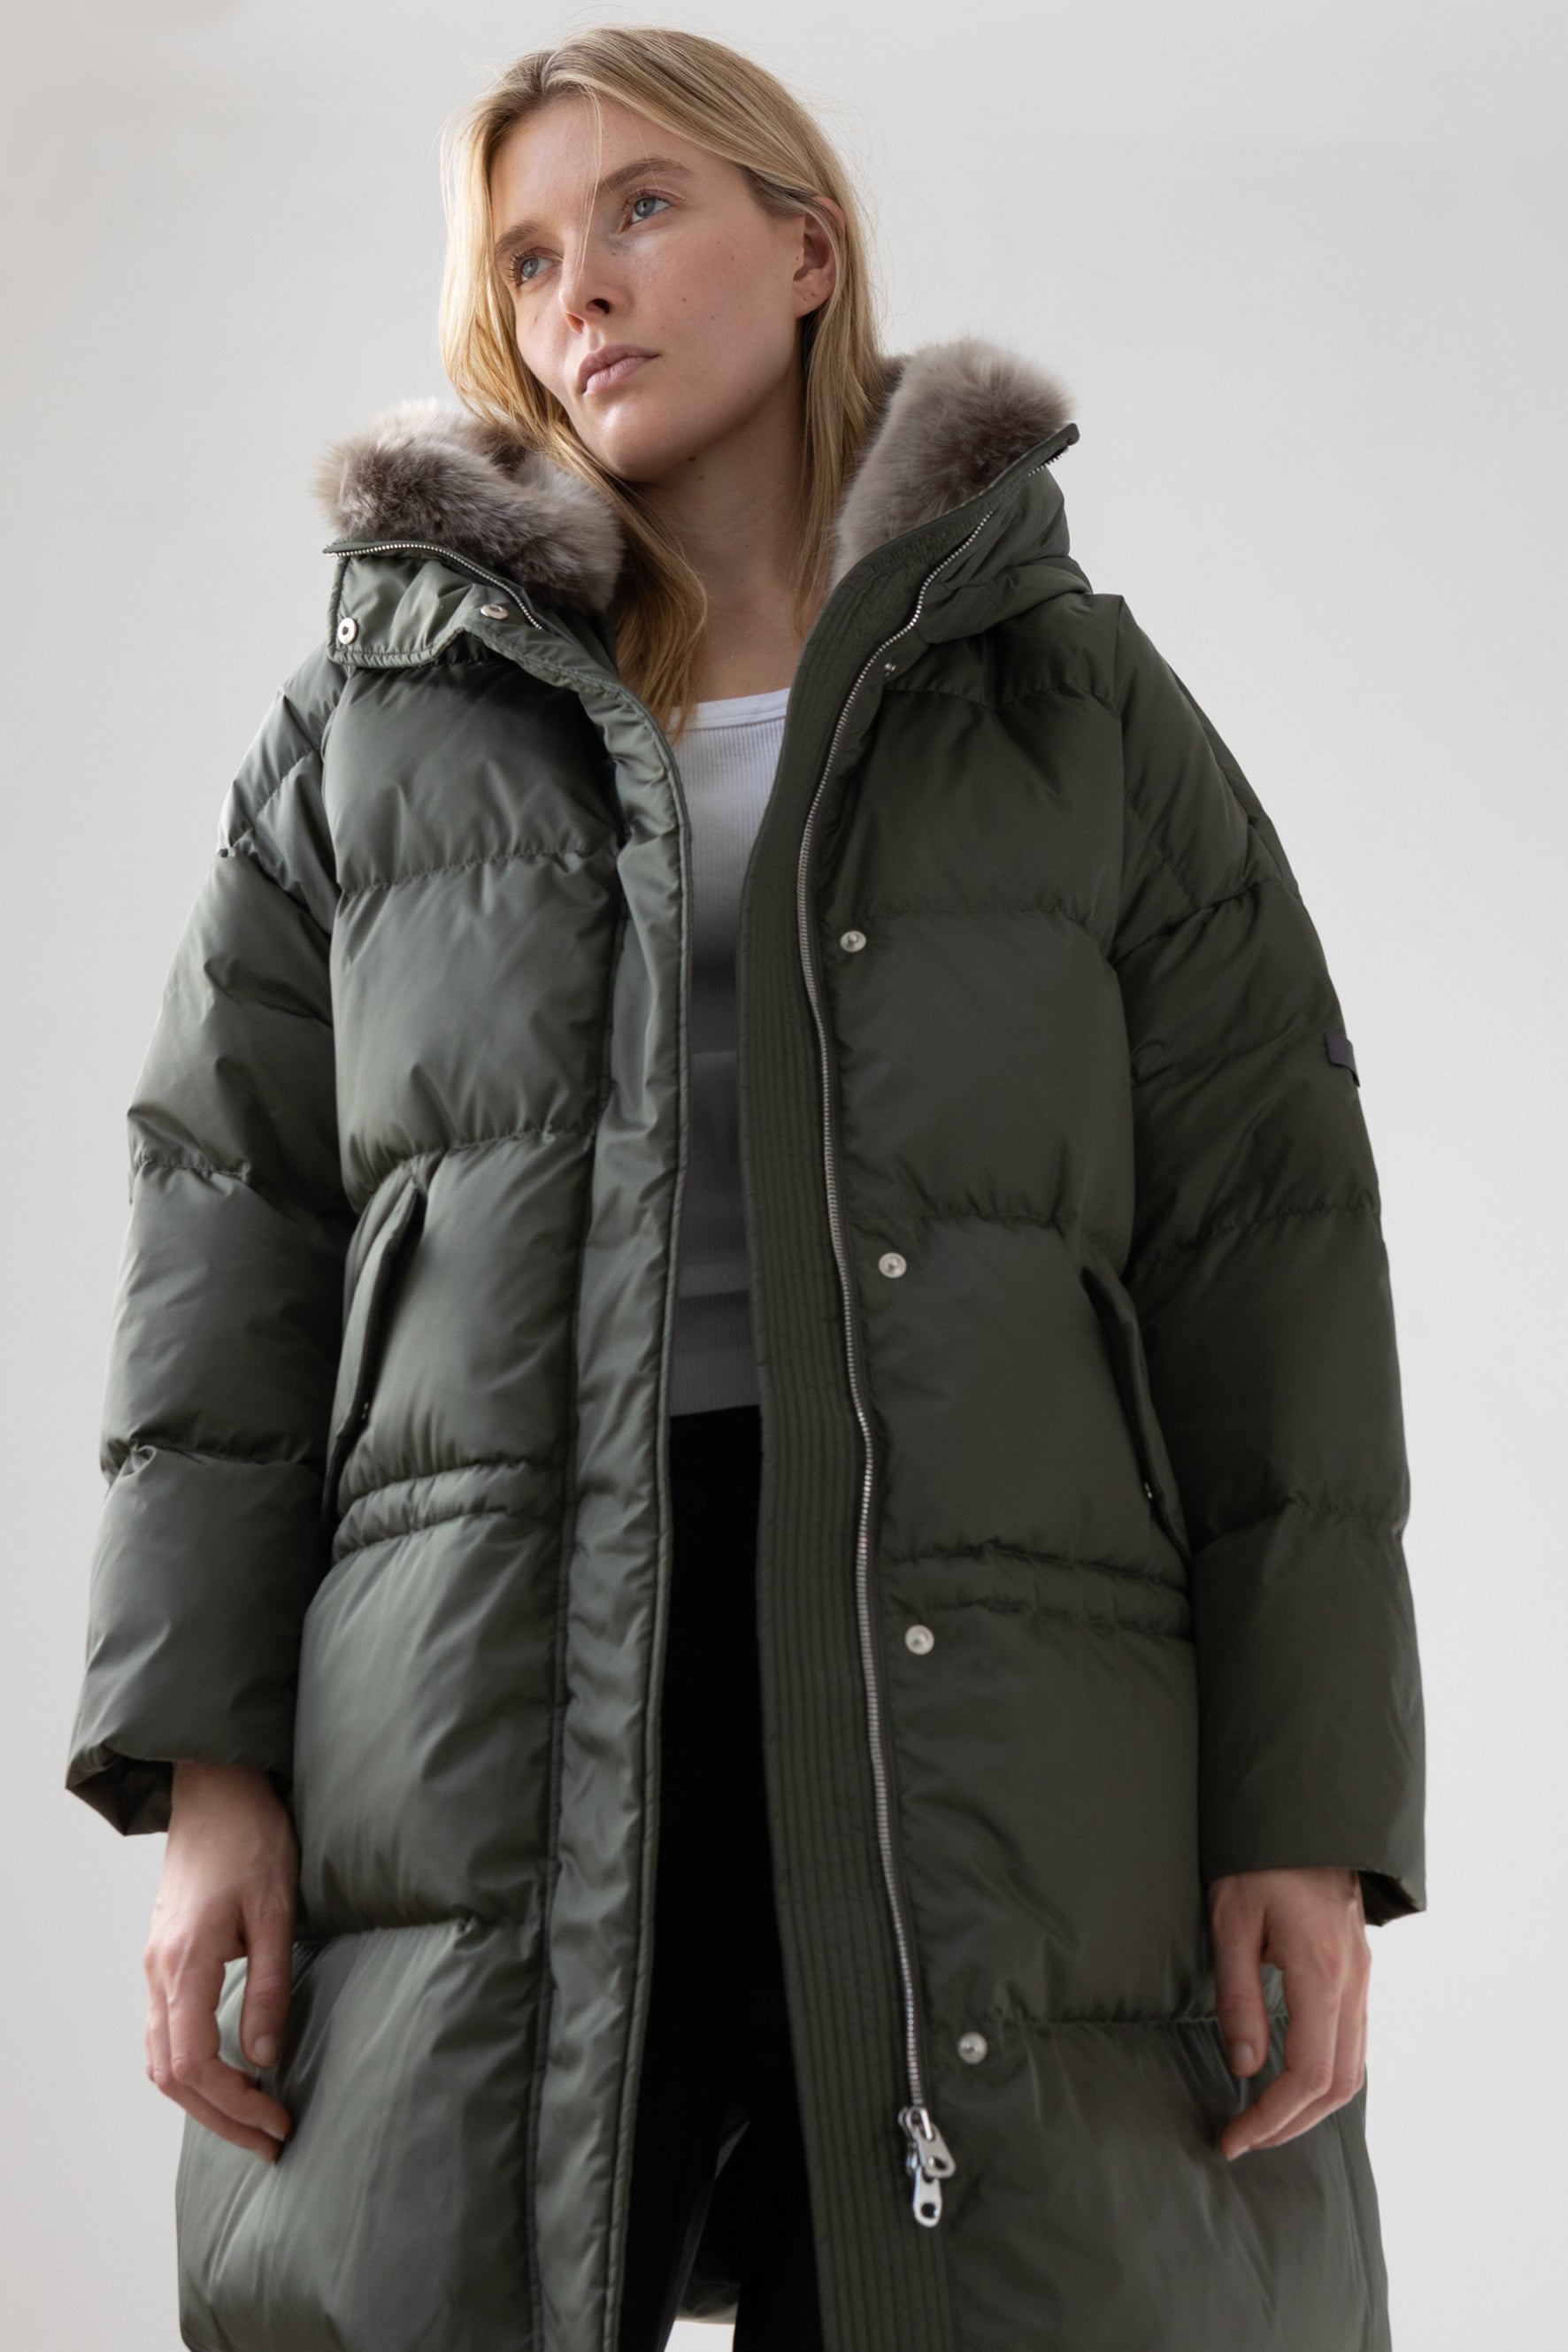 oversized Lempelius down parka in the color mud green